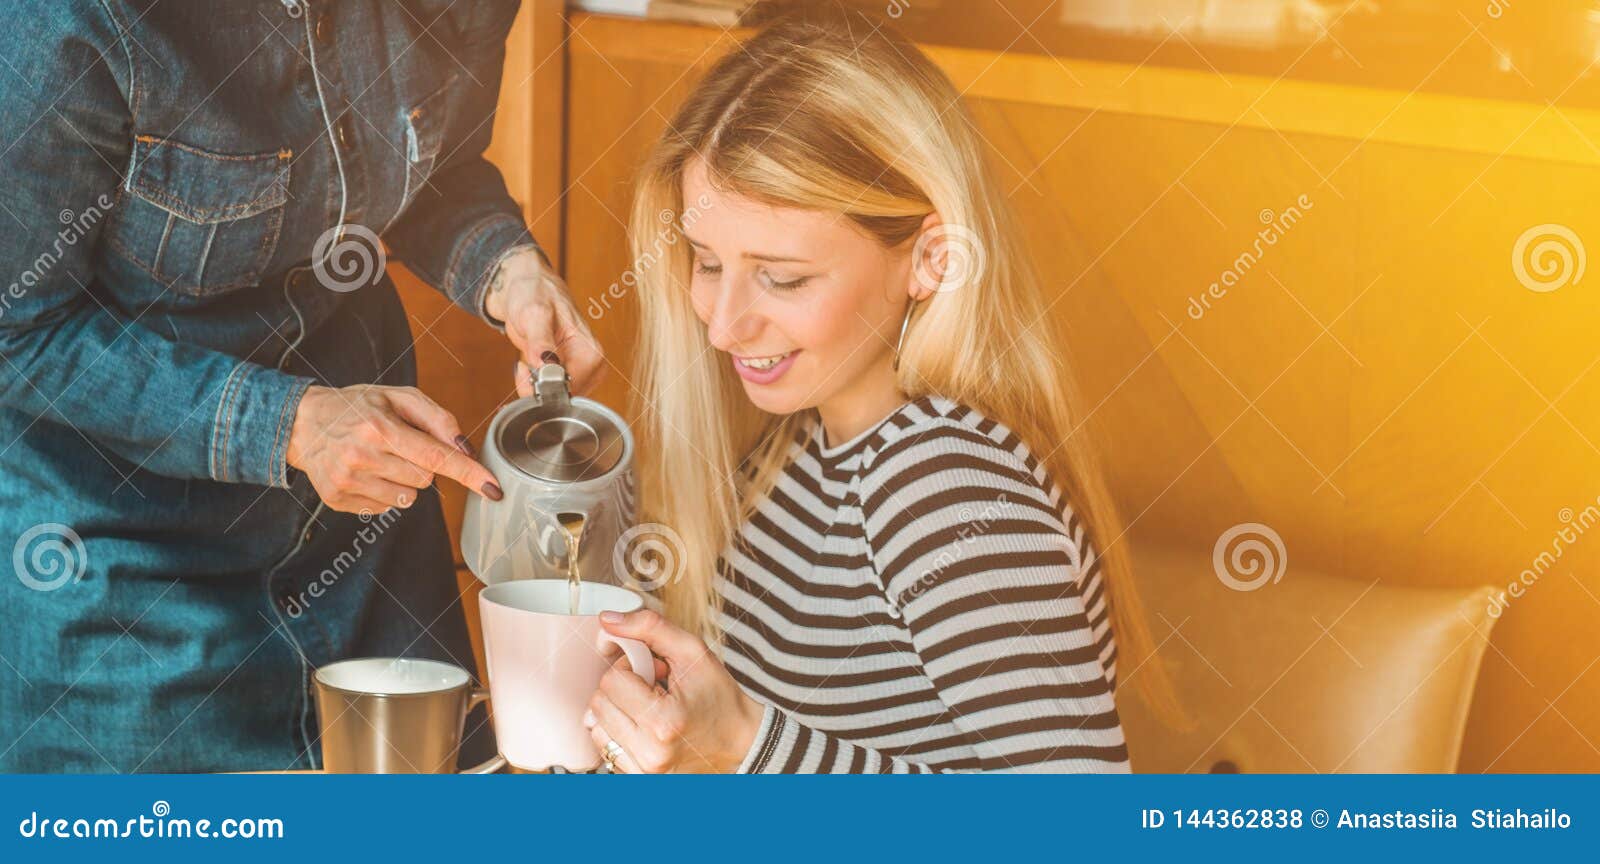 Two Happy Women Sitting in a Cafe, Drink a Hot Tea, Tell Each Other Funny  Stories, Being in a Good Mood, Laughing Happily Stock Photo - Image of funny,  real: 144362838